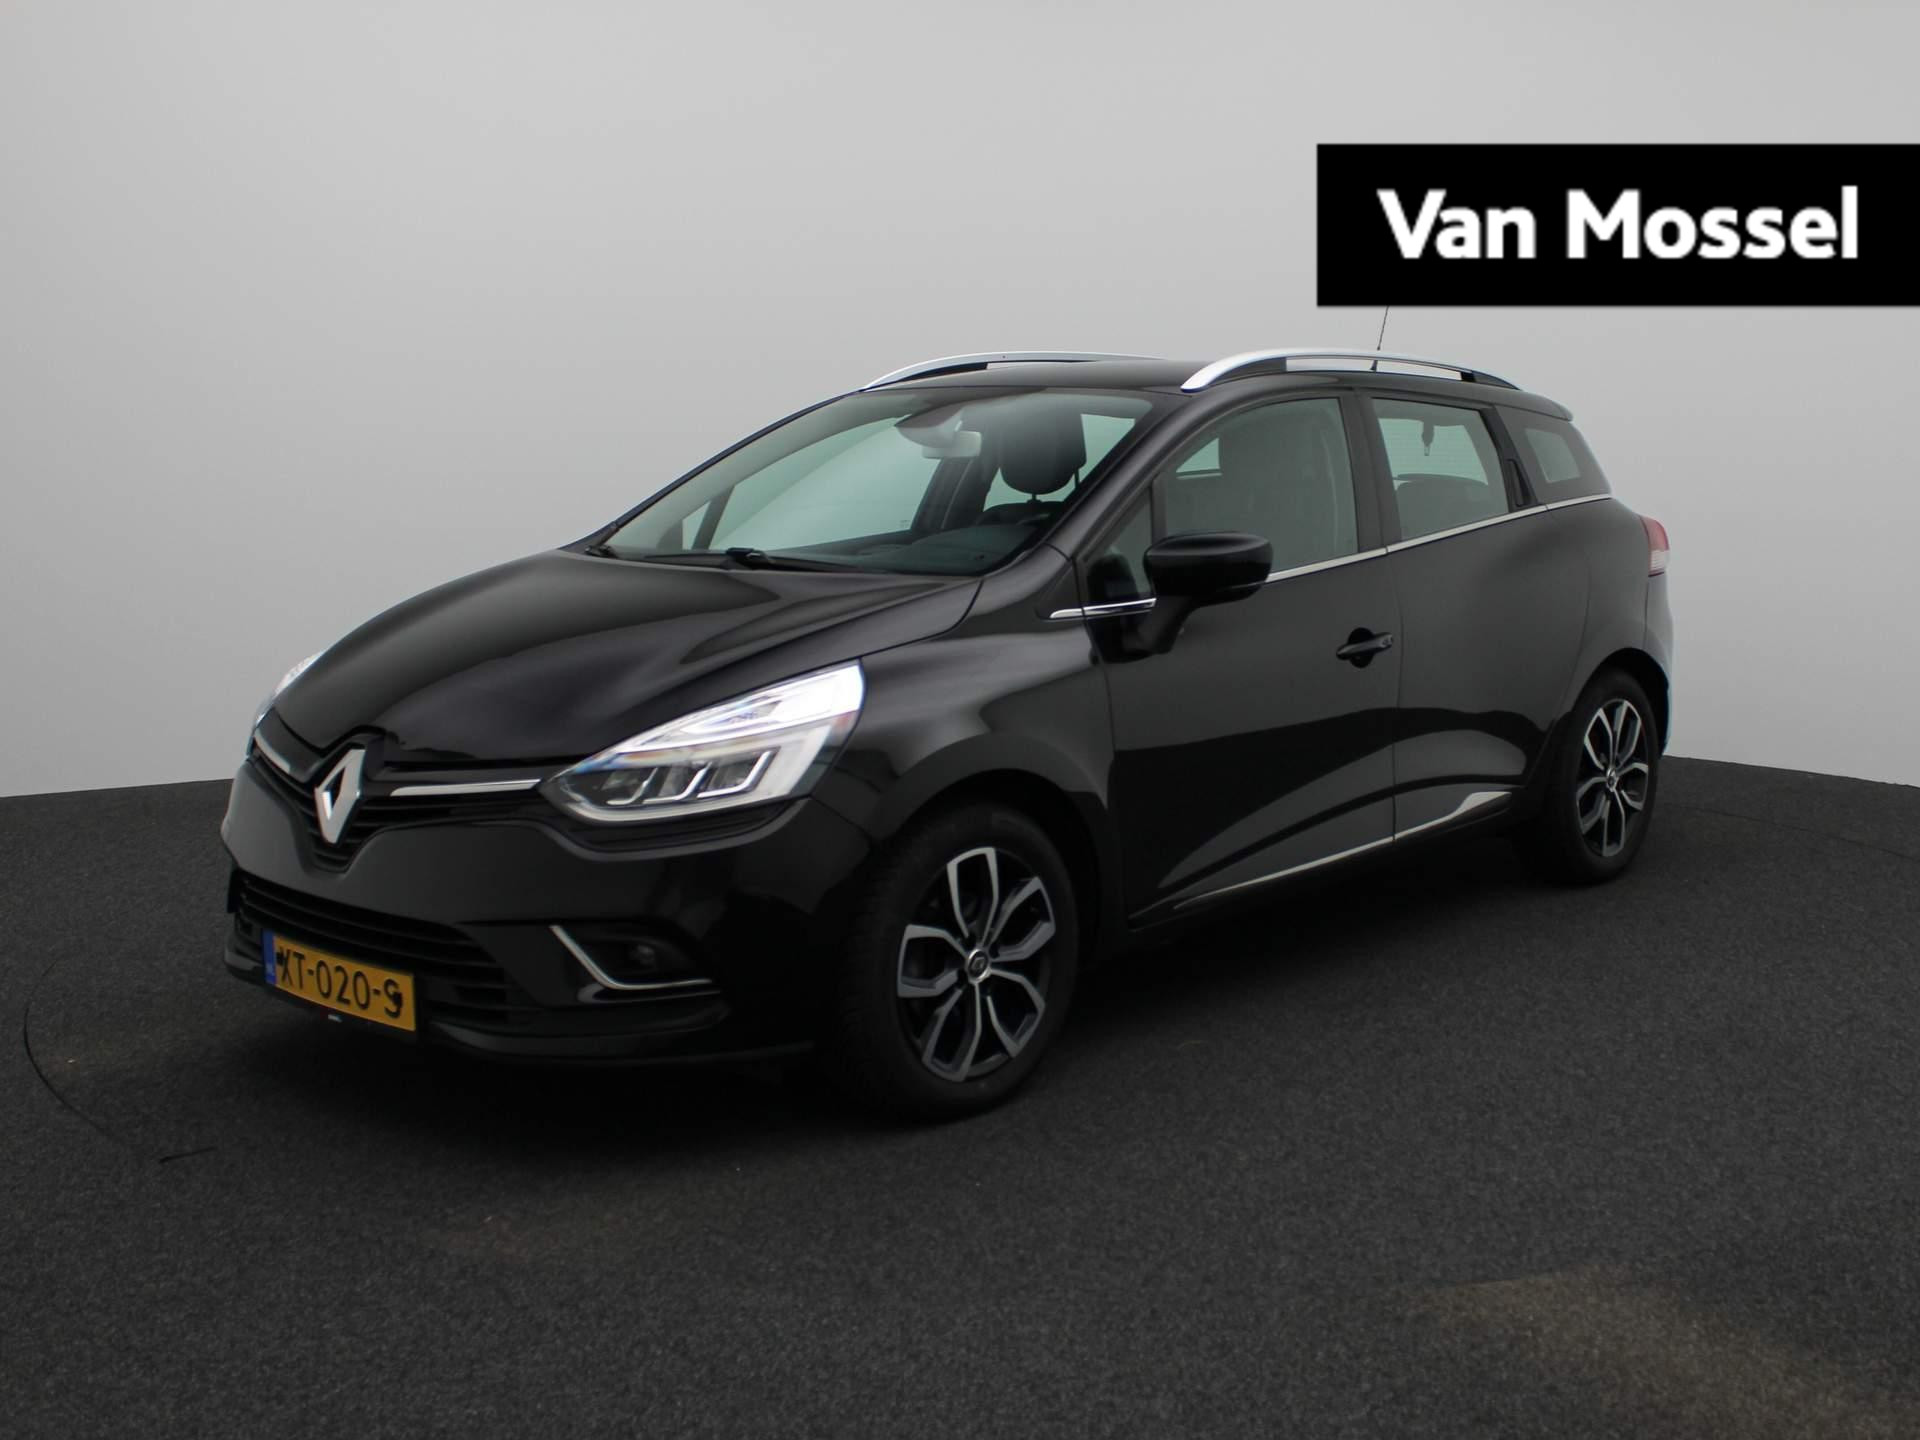 Renault Clio Estate 0.9 TCe Intens | Trekhaak | Climate Control | LED Pure Vision | Full-Map Navigatie | Keyless | PDC Achter | 16" LMV | Privacy Glass